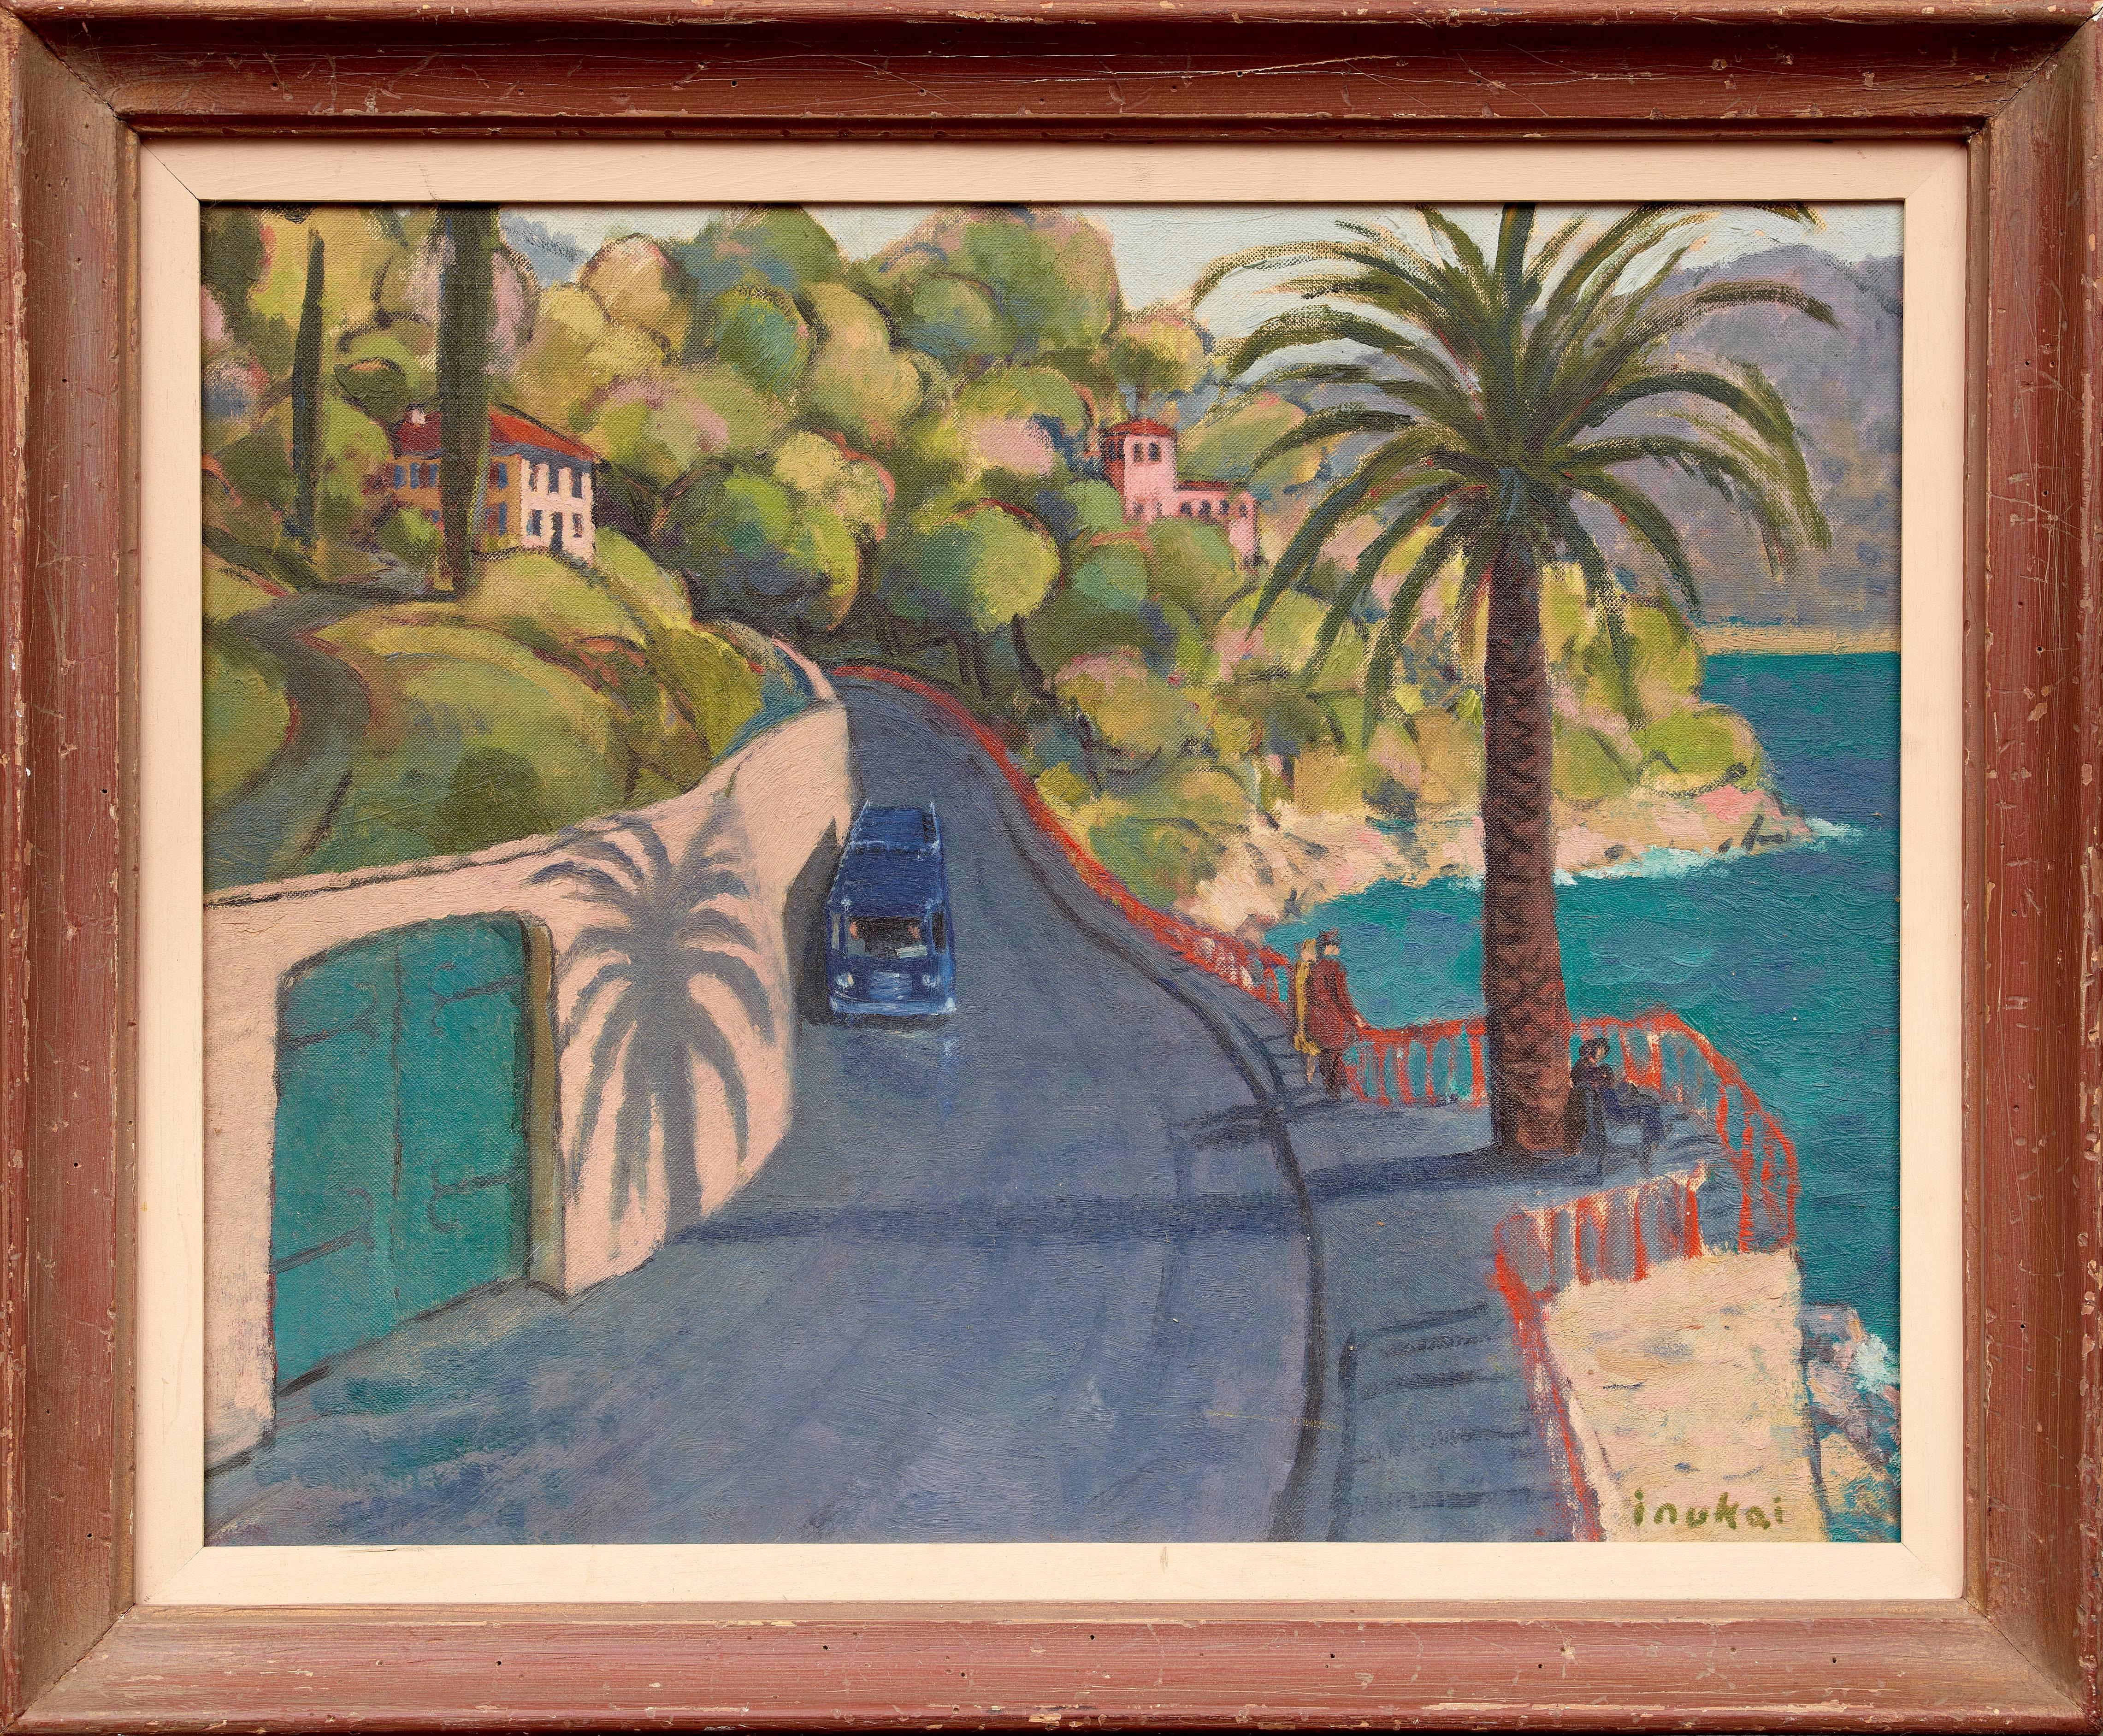 Artist: Kyohei Inukai (aka Earle Goodenow), American (1913 - 1985)
Title: Italy
Year: 1955
Medium: Oil on Canvas, signed
Size: 14.5 x 18 in. (36.83 x 45.72 cm)
Frame Size: 18.5 x 22 inches